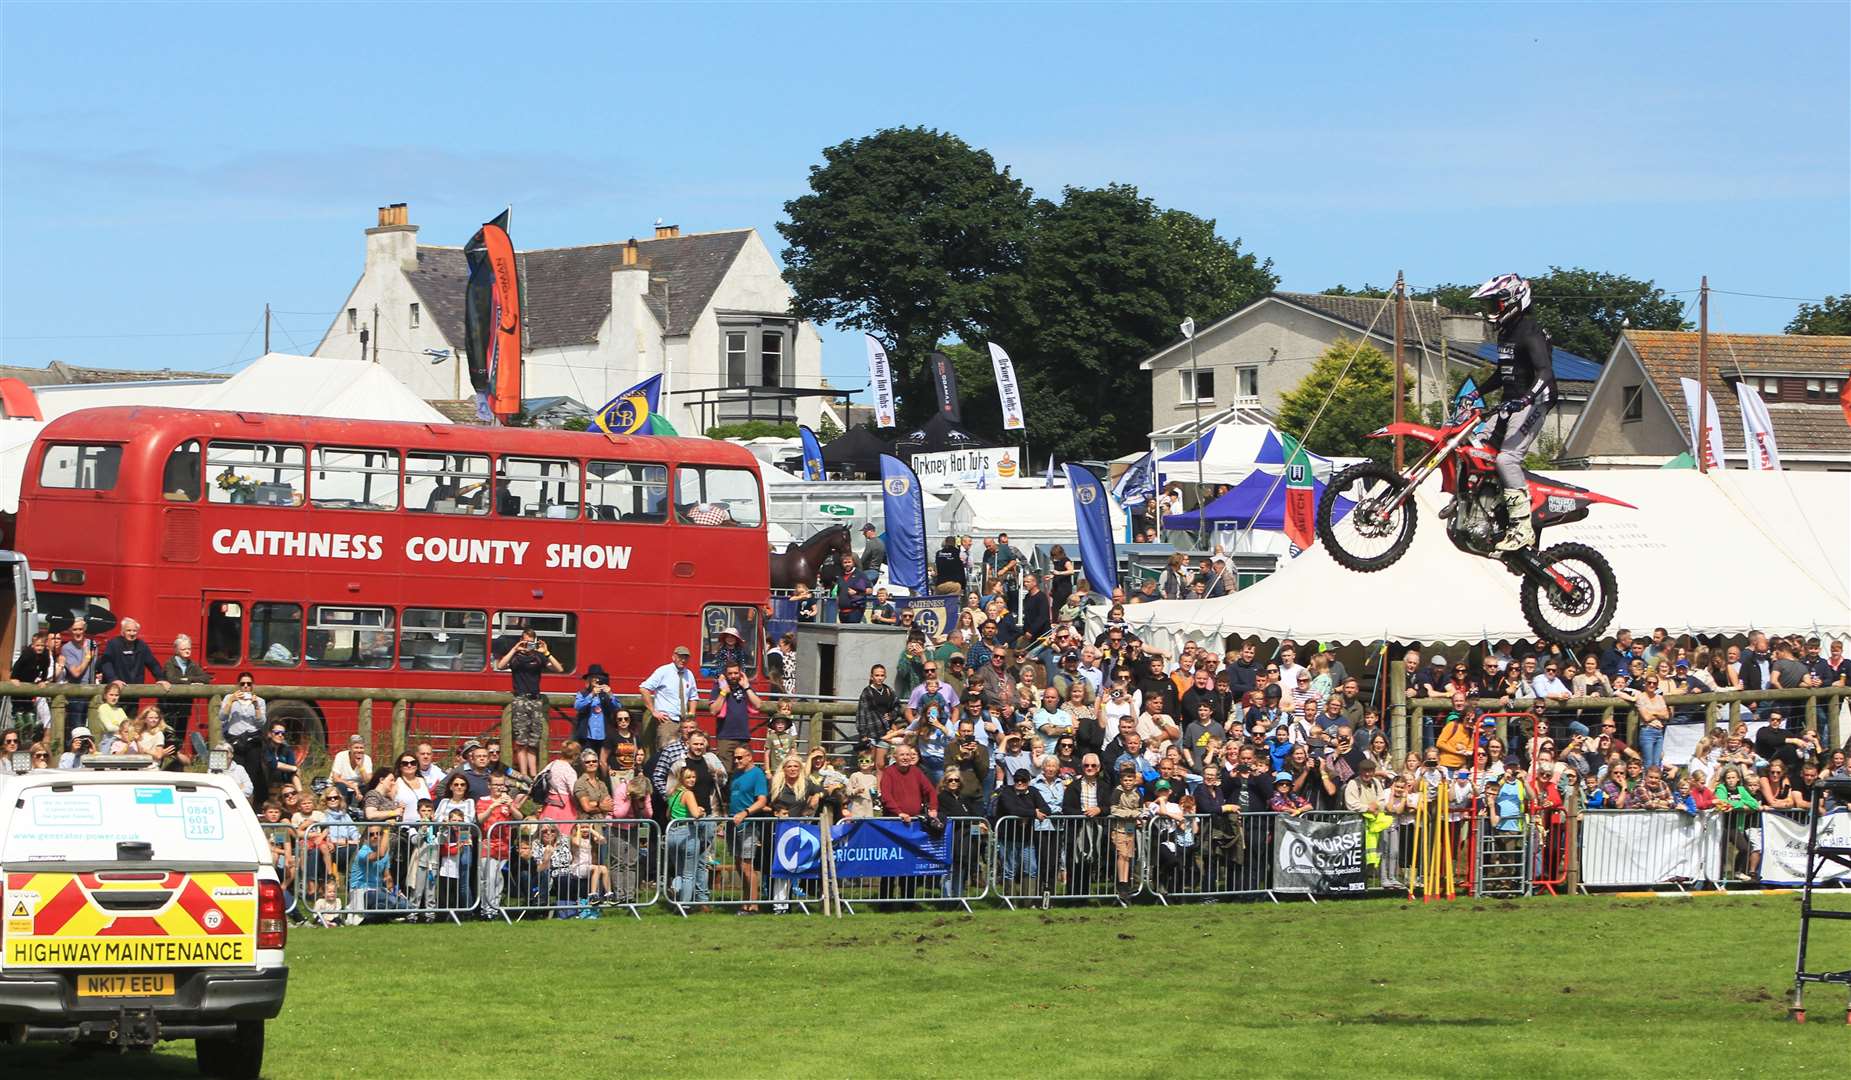 A motorbike jump by the Stannage Stunt Team, the main ring attraction at the County Show. Picture: Alan Hendry